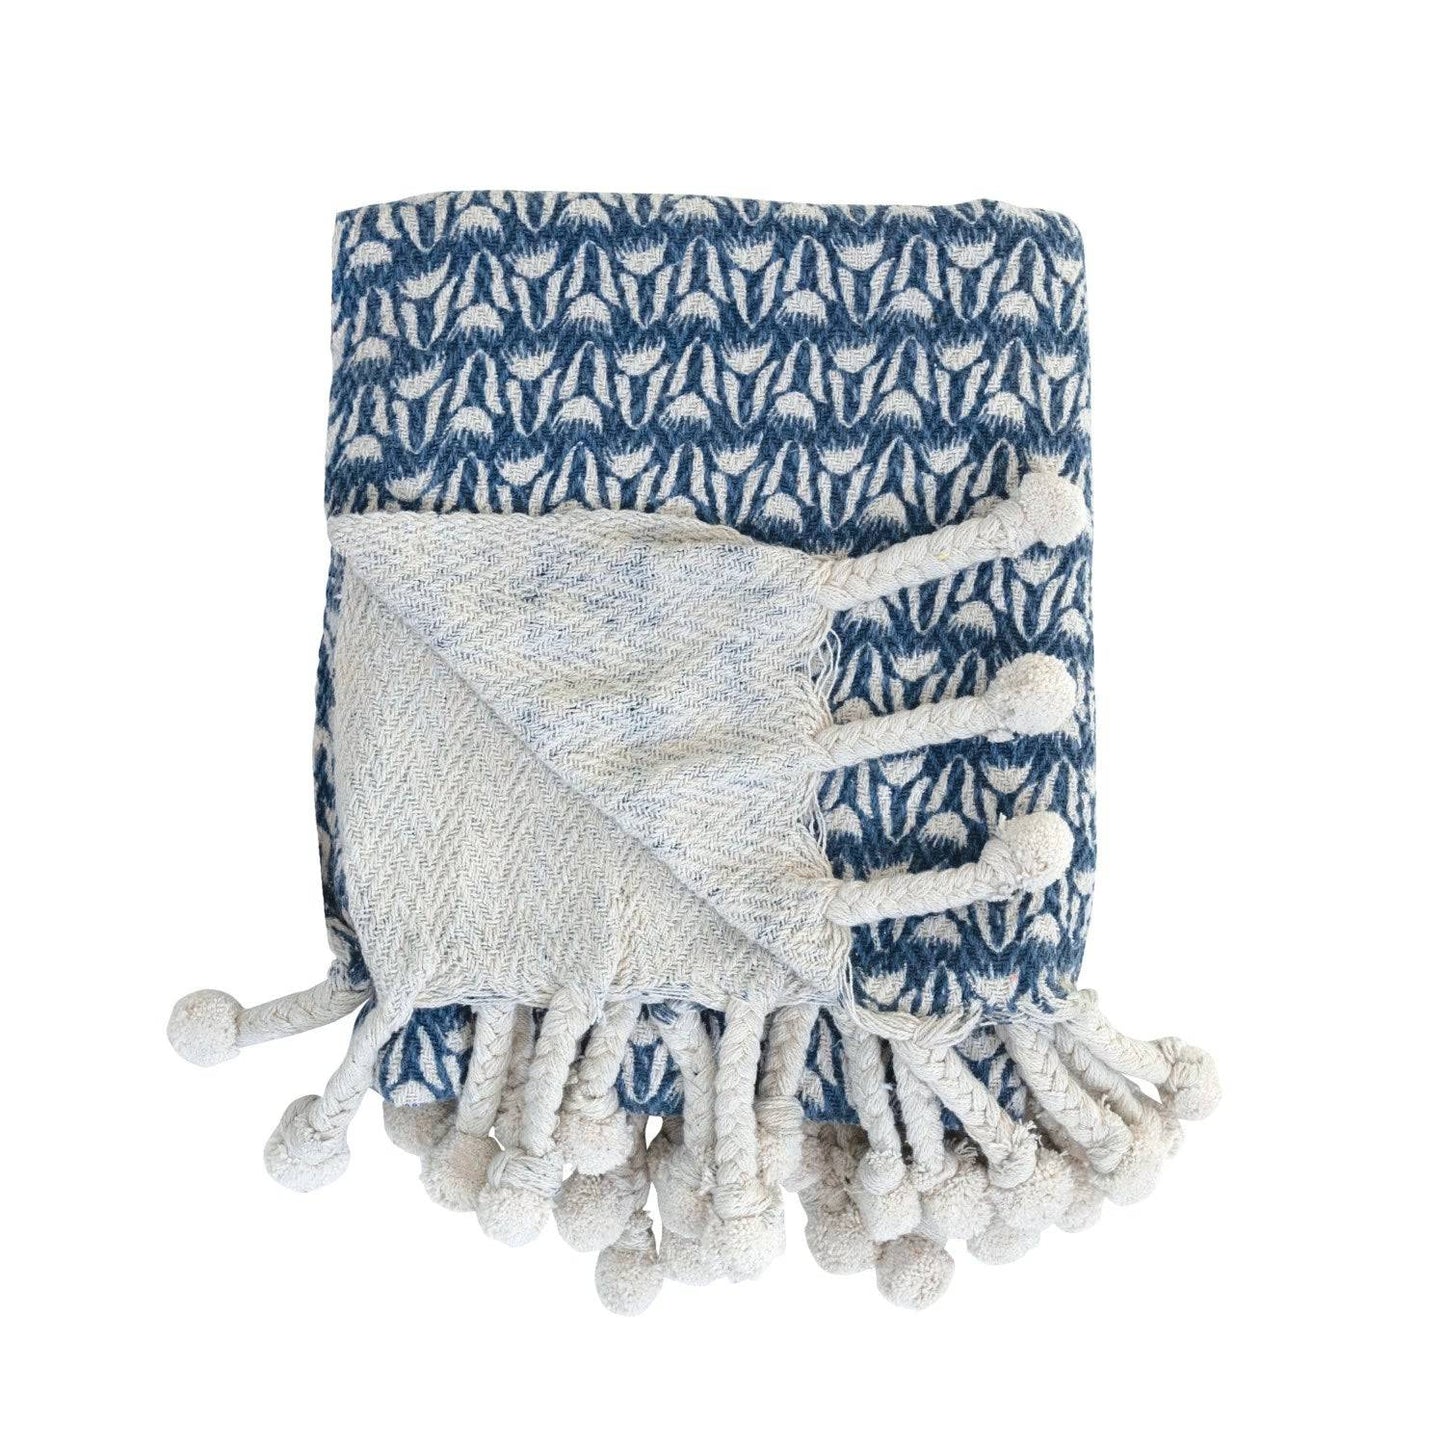 Recycled Cotton Blend Printed Throw - Findlay Rowe Designs